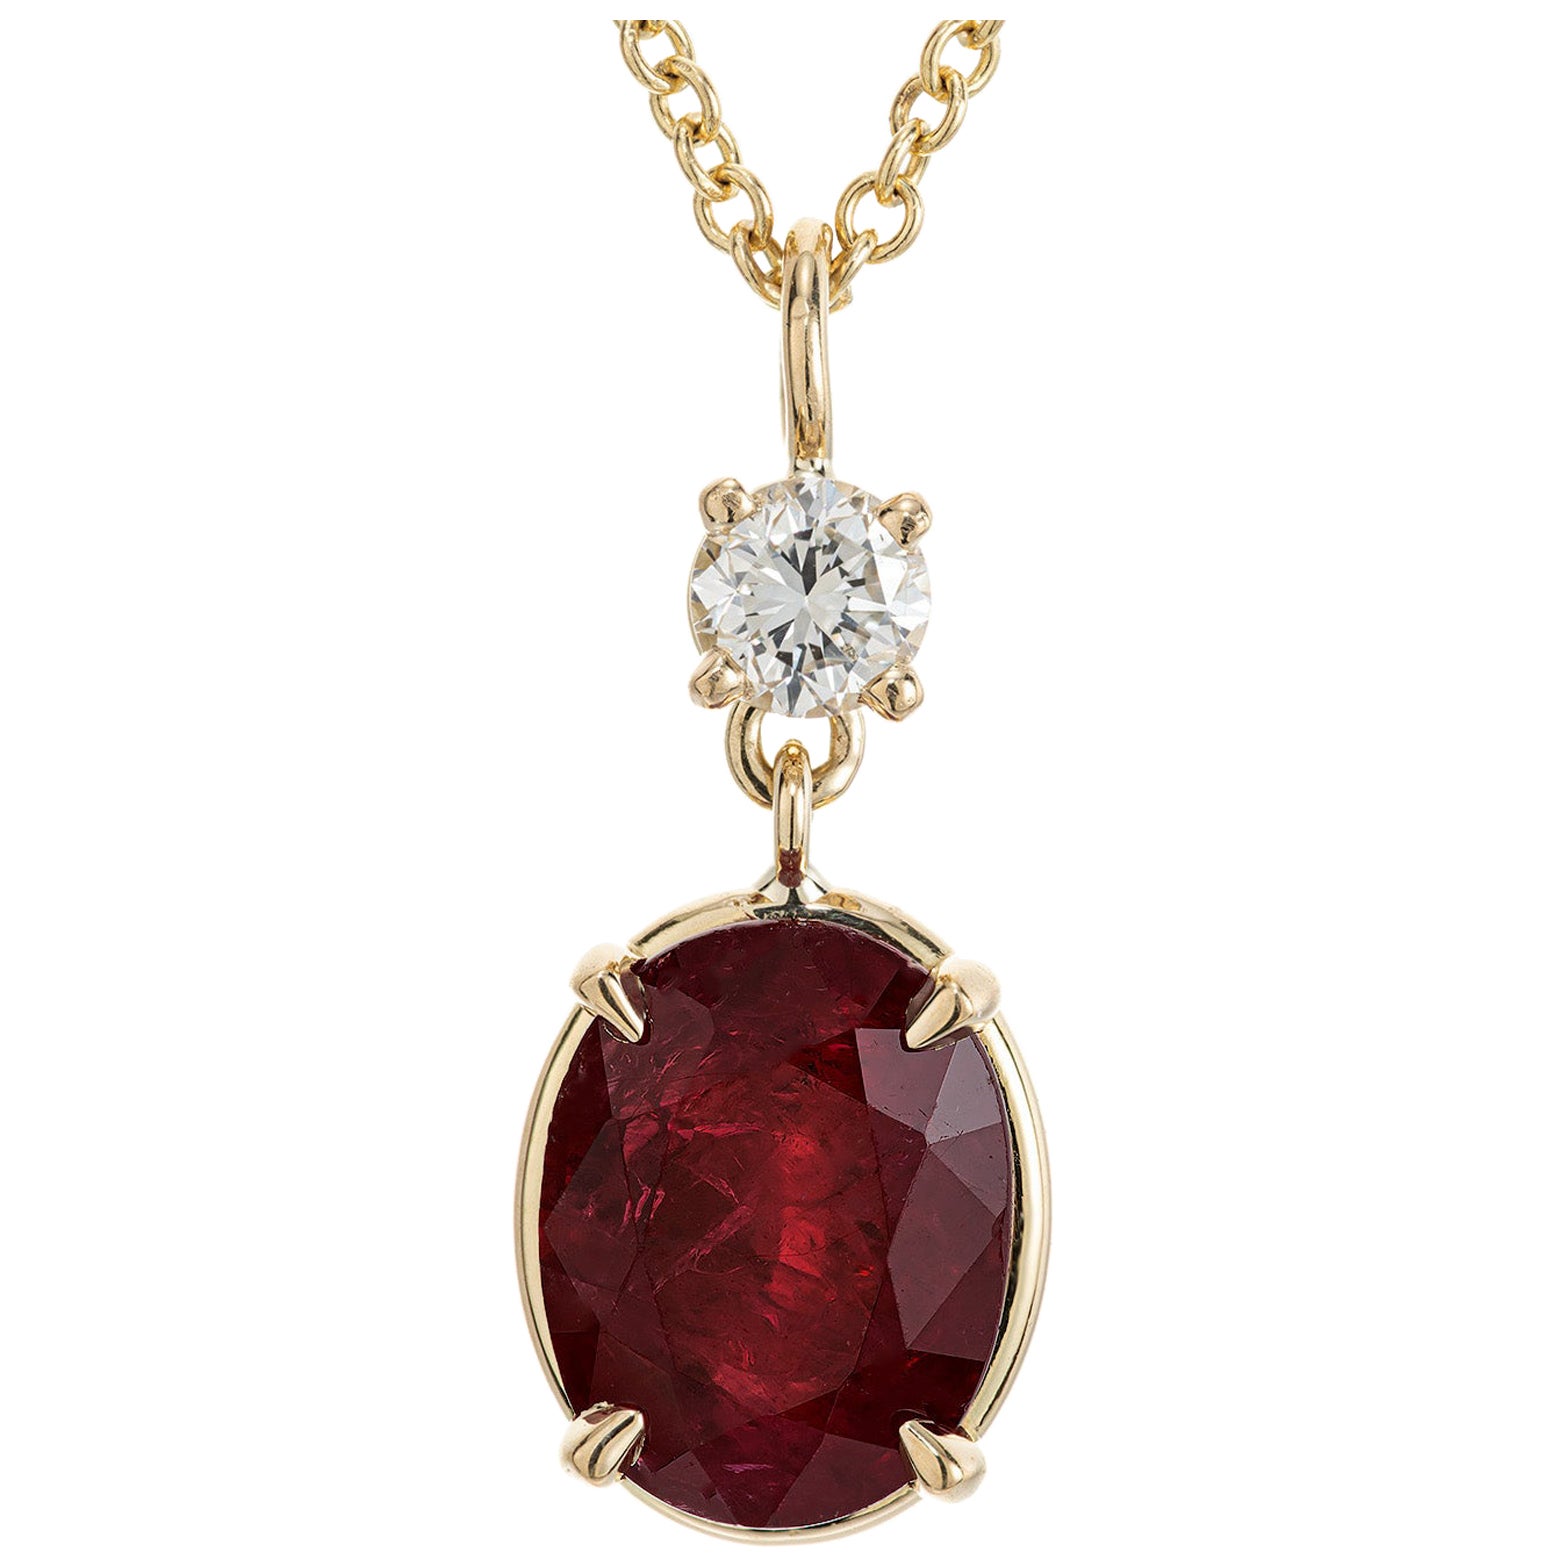 Peter Suchy GIA Certified 2.72 Carat Ruby Diamond Yellow Gold Pendant Necklace